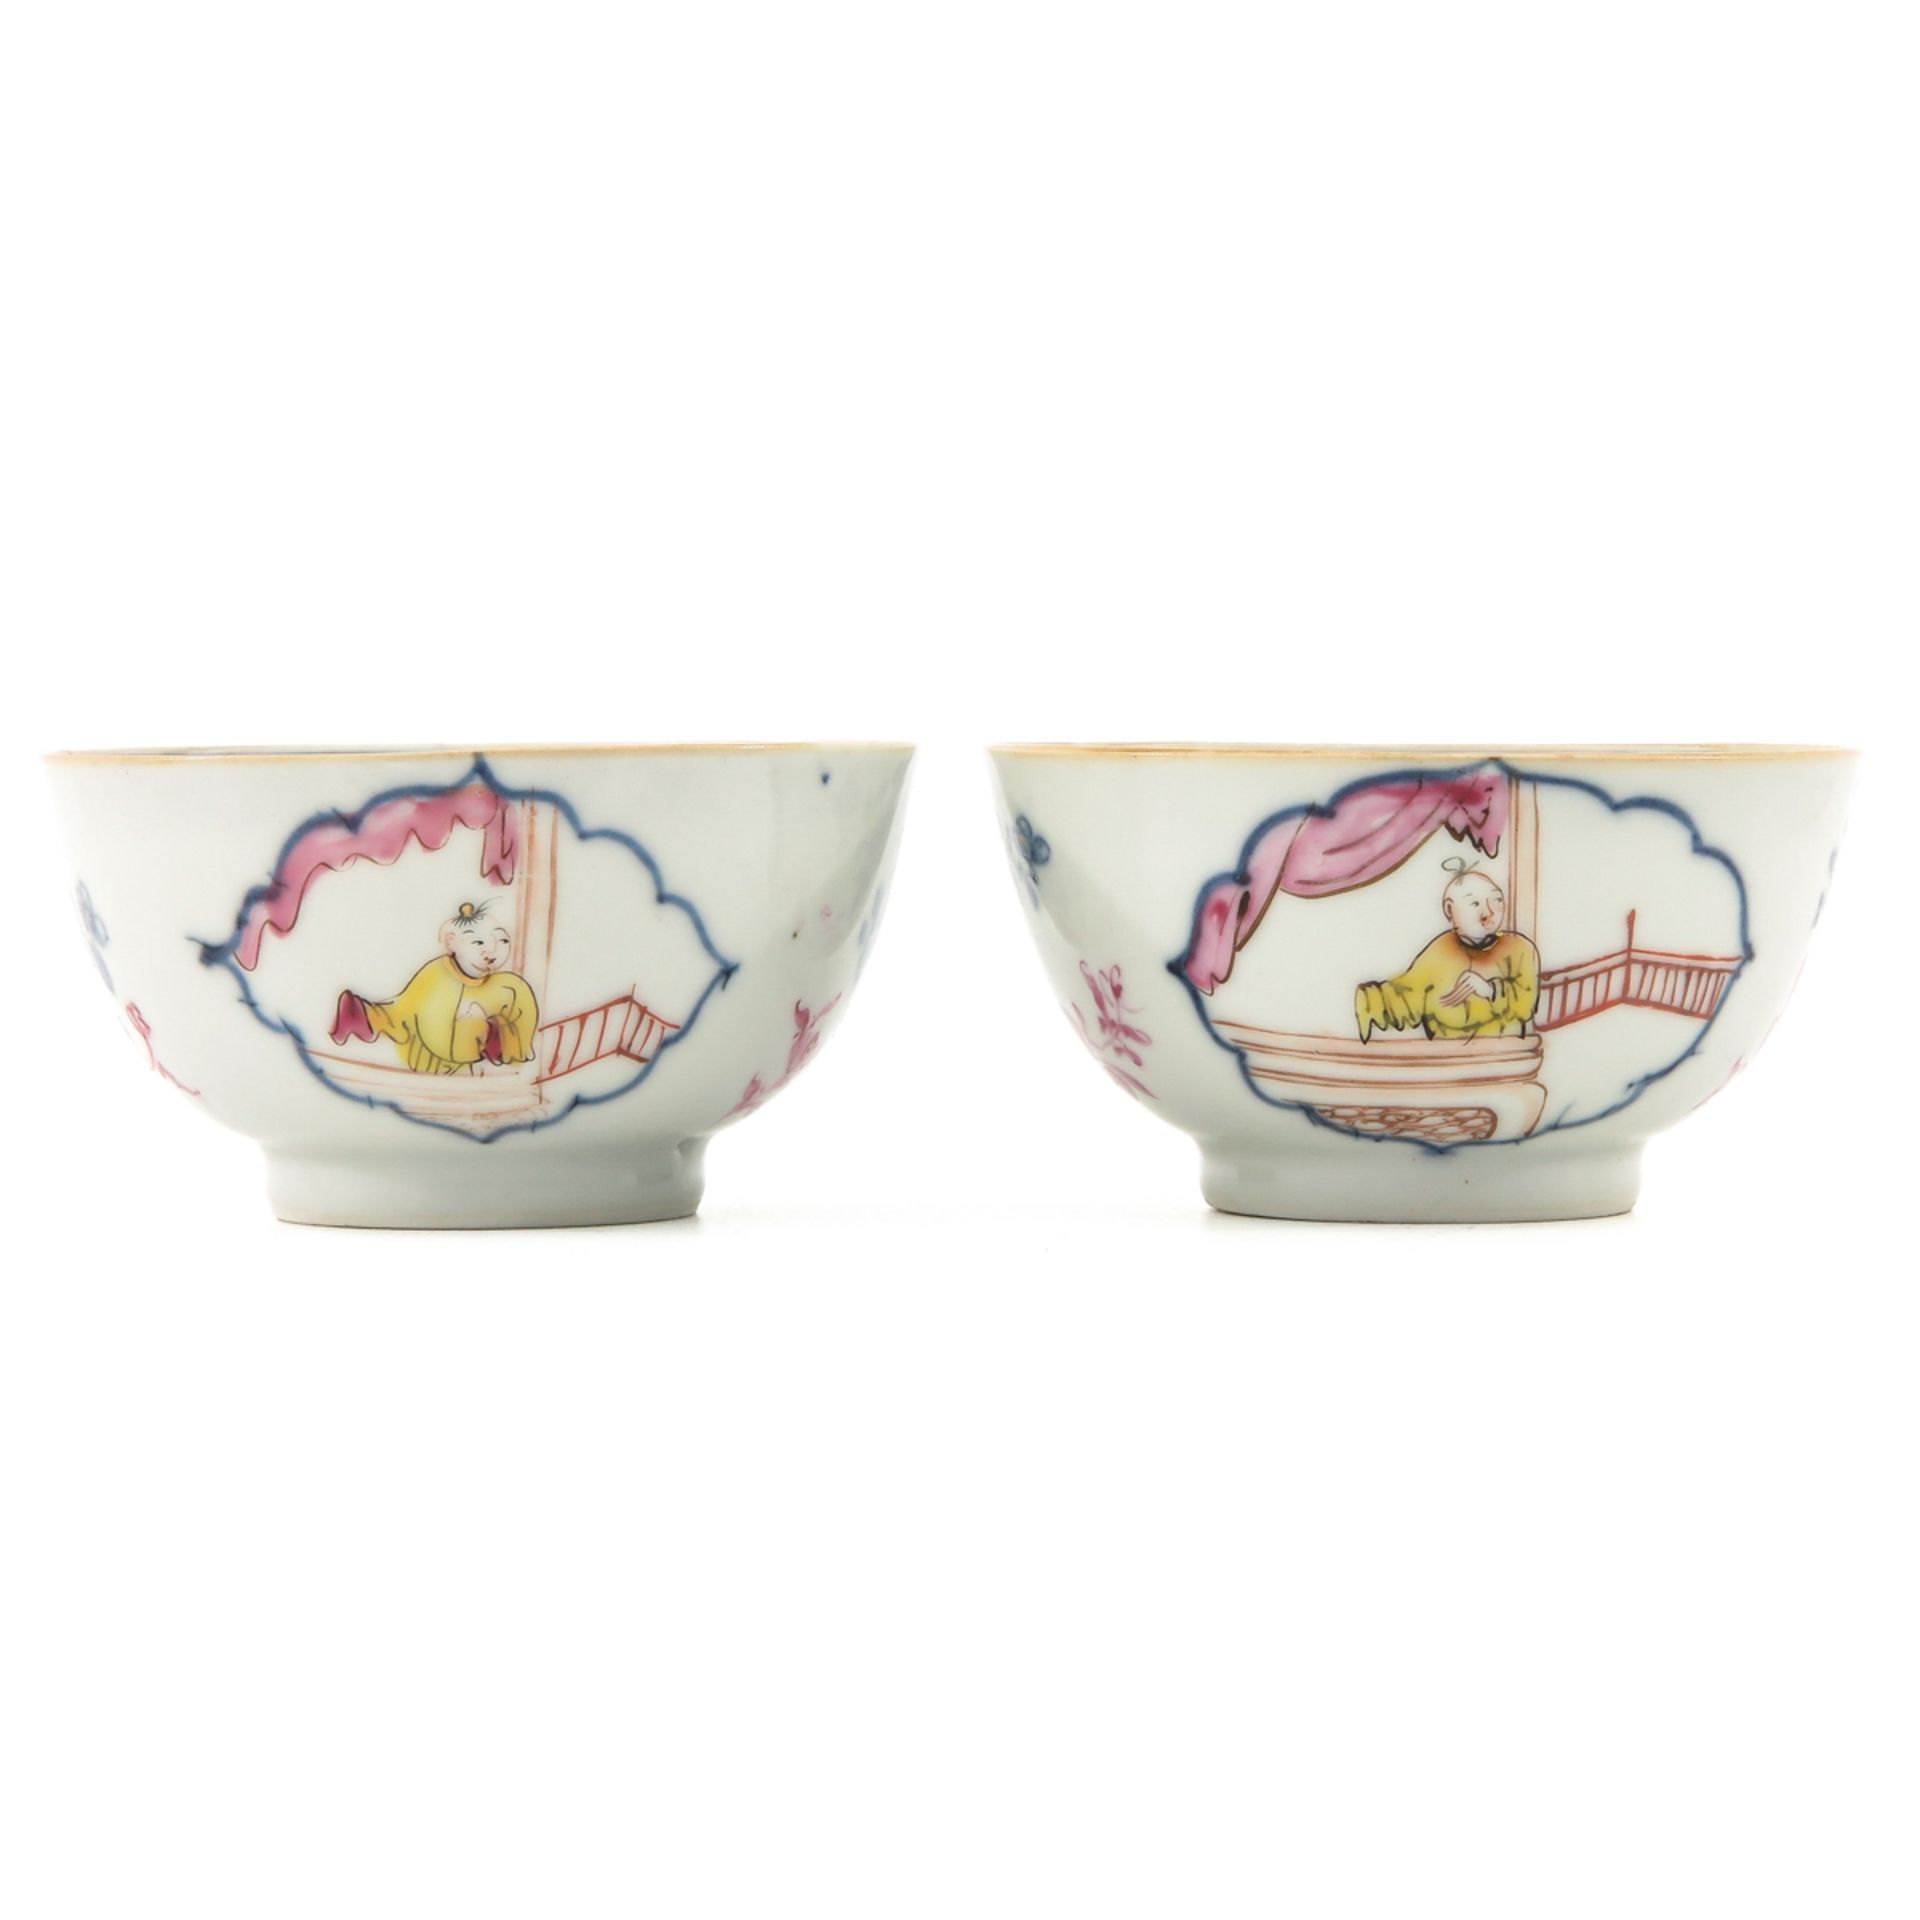 A Lot of 2 Famille Rose Cups and Saucers - Image 3 of 10